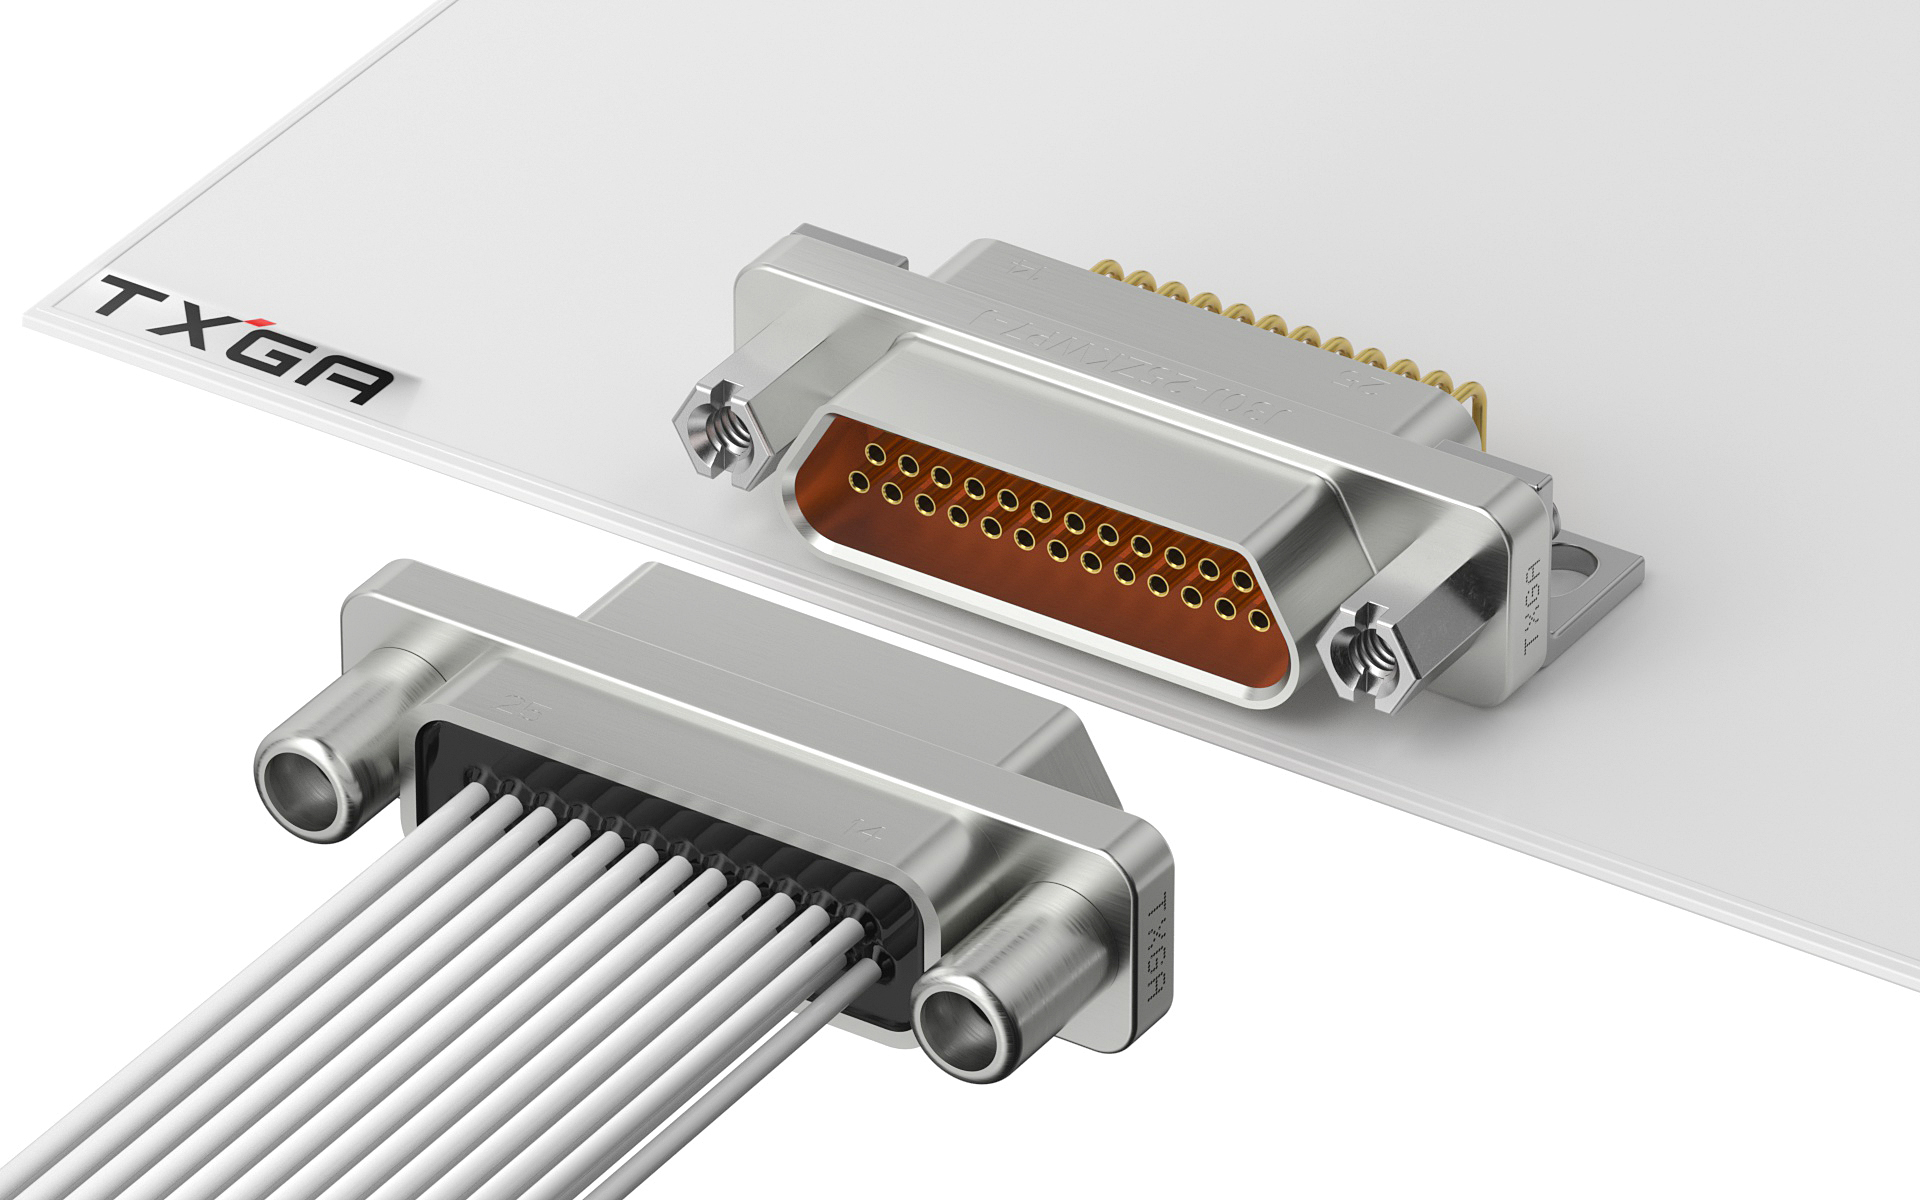 As a leading global supplier of critical connectors, TXGA has been providing reliable, professional, and stable connector products to the